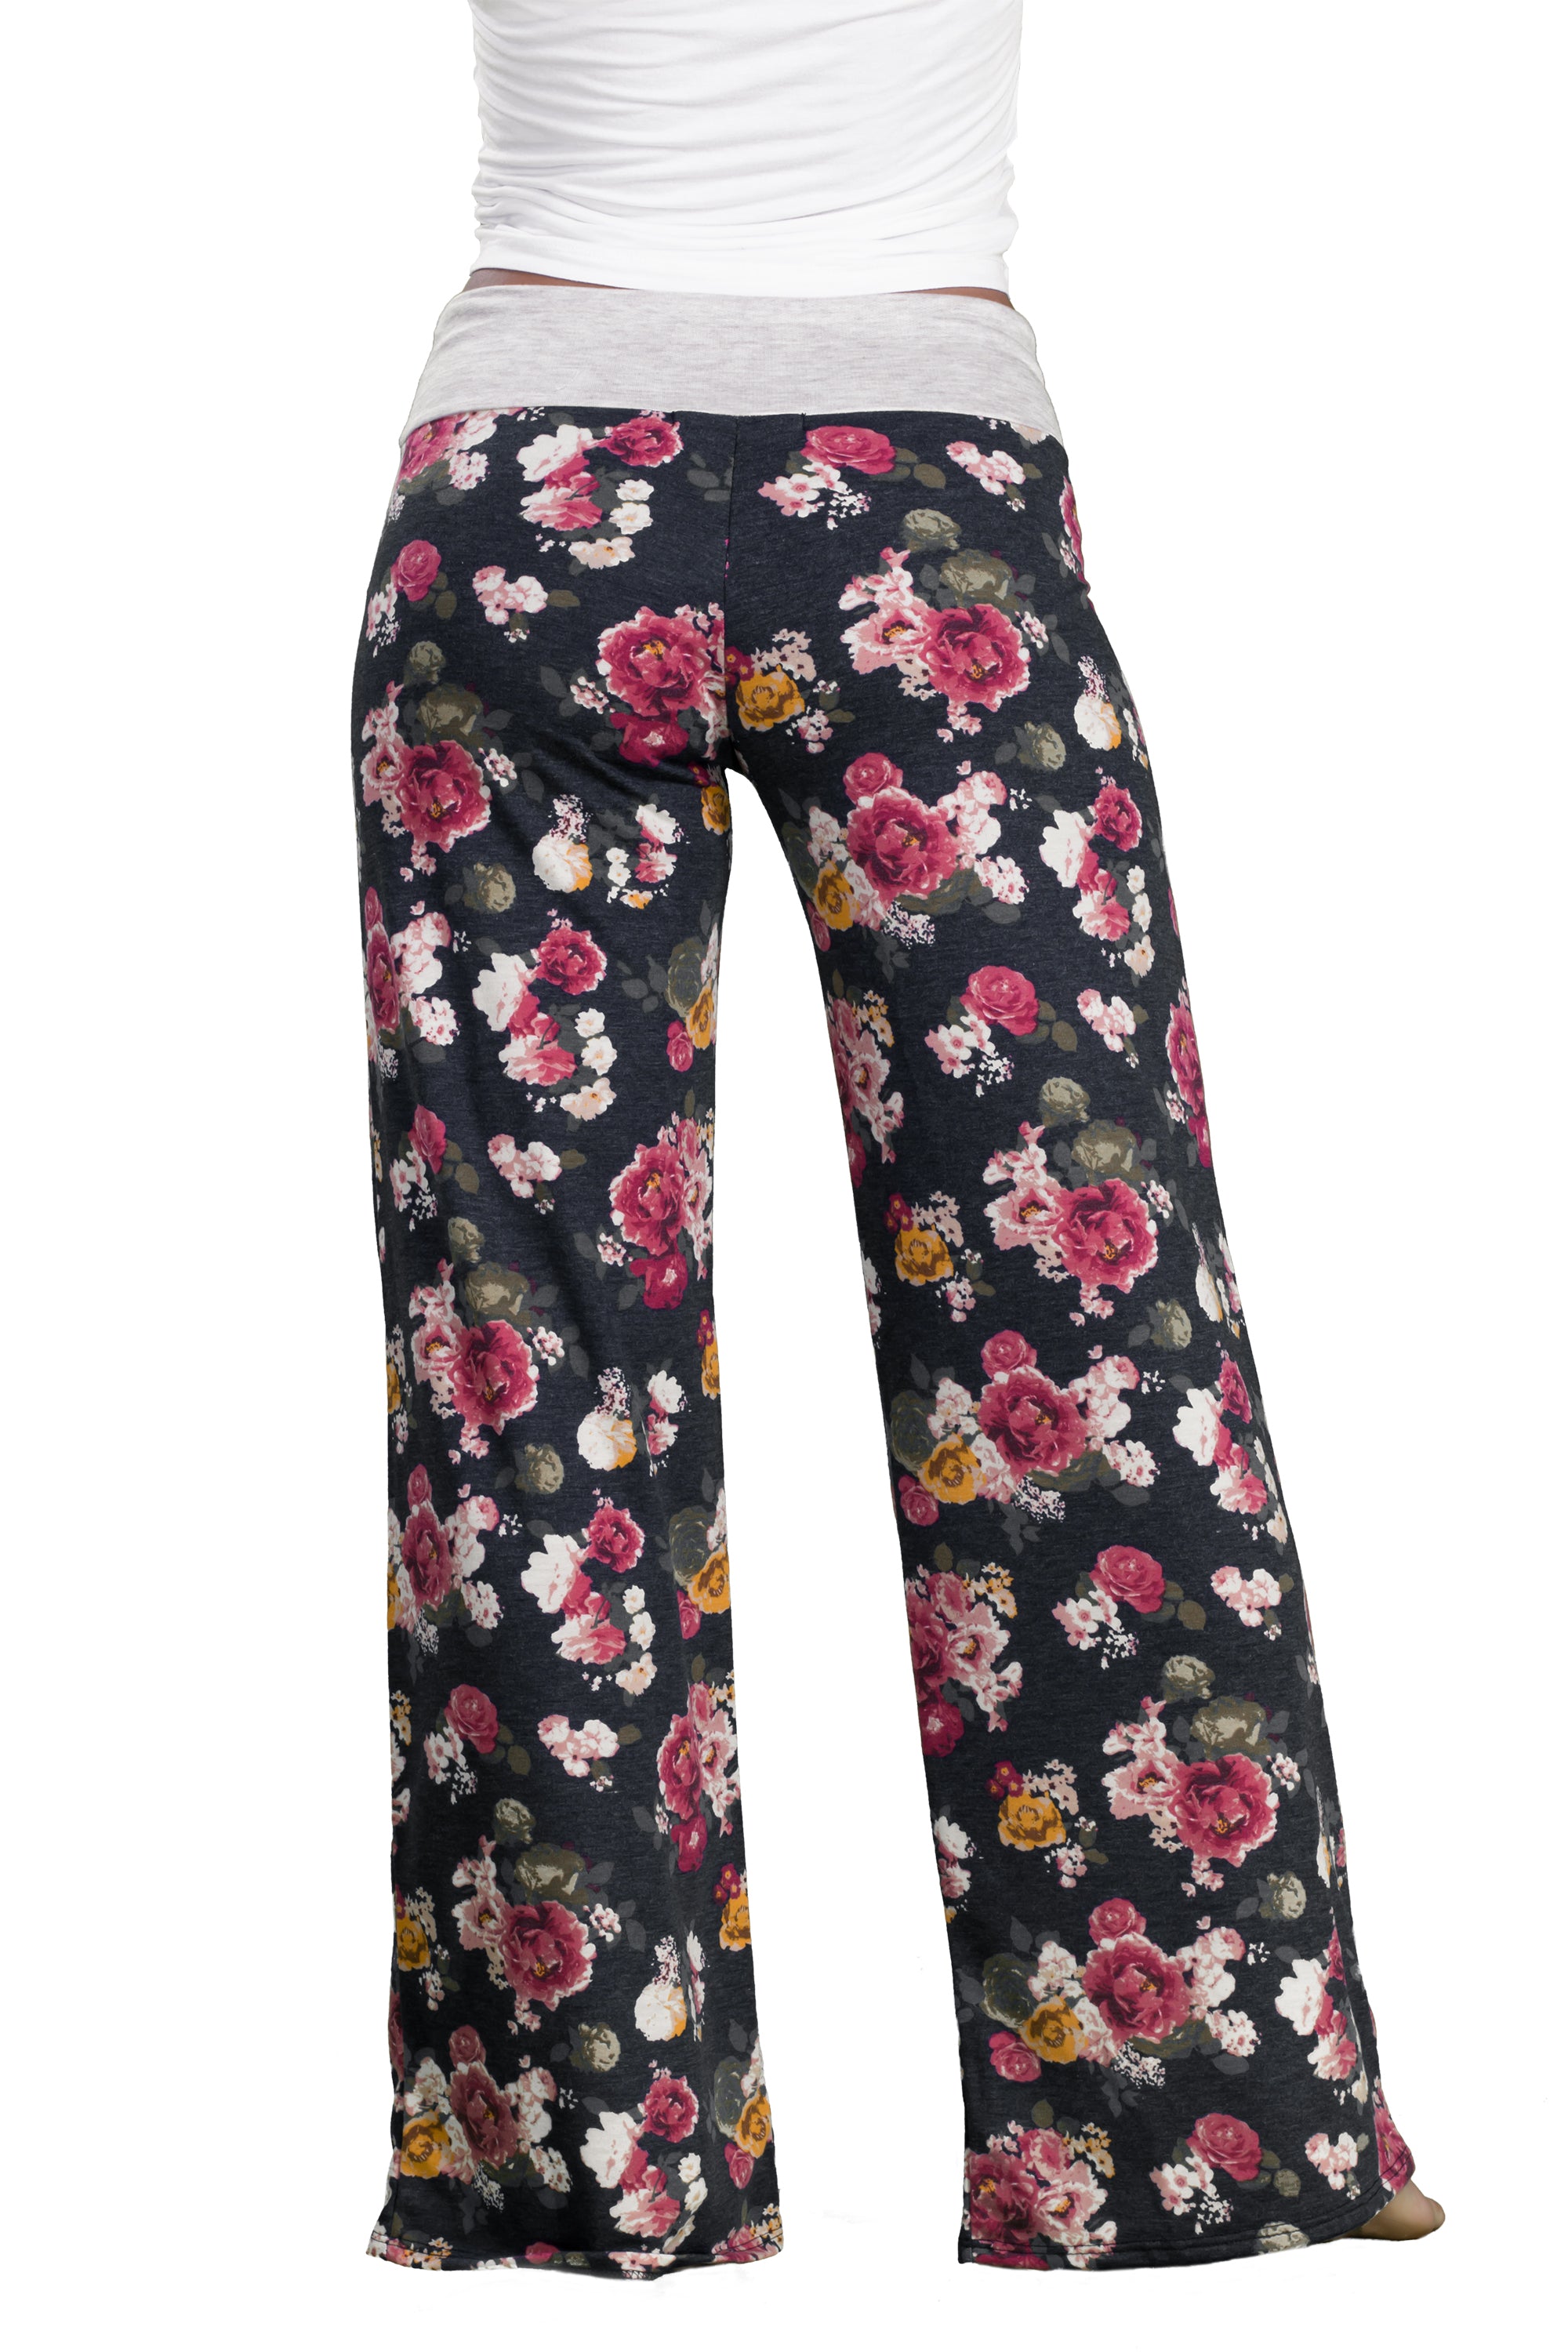 Womens Floral Lounge Pajama Pants | Inspire L Amour - Inspire L' Amour